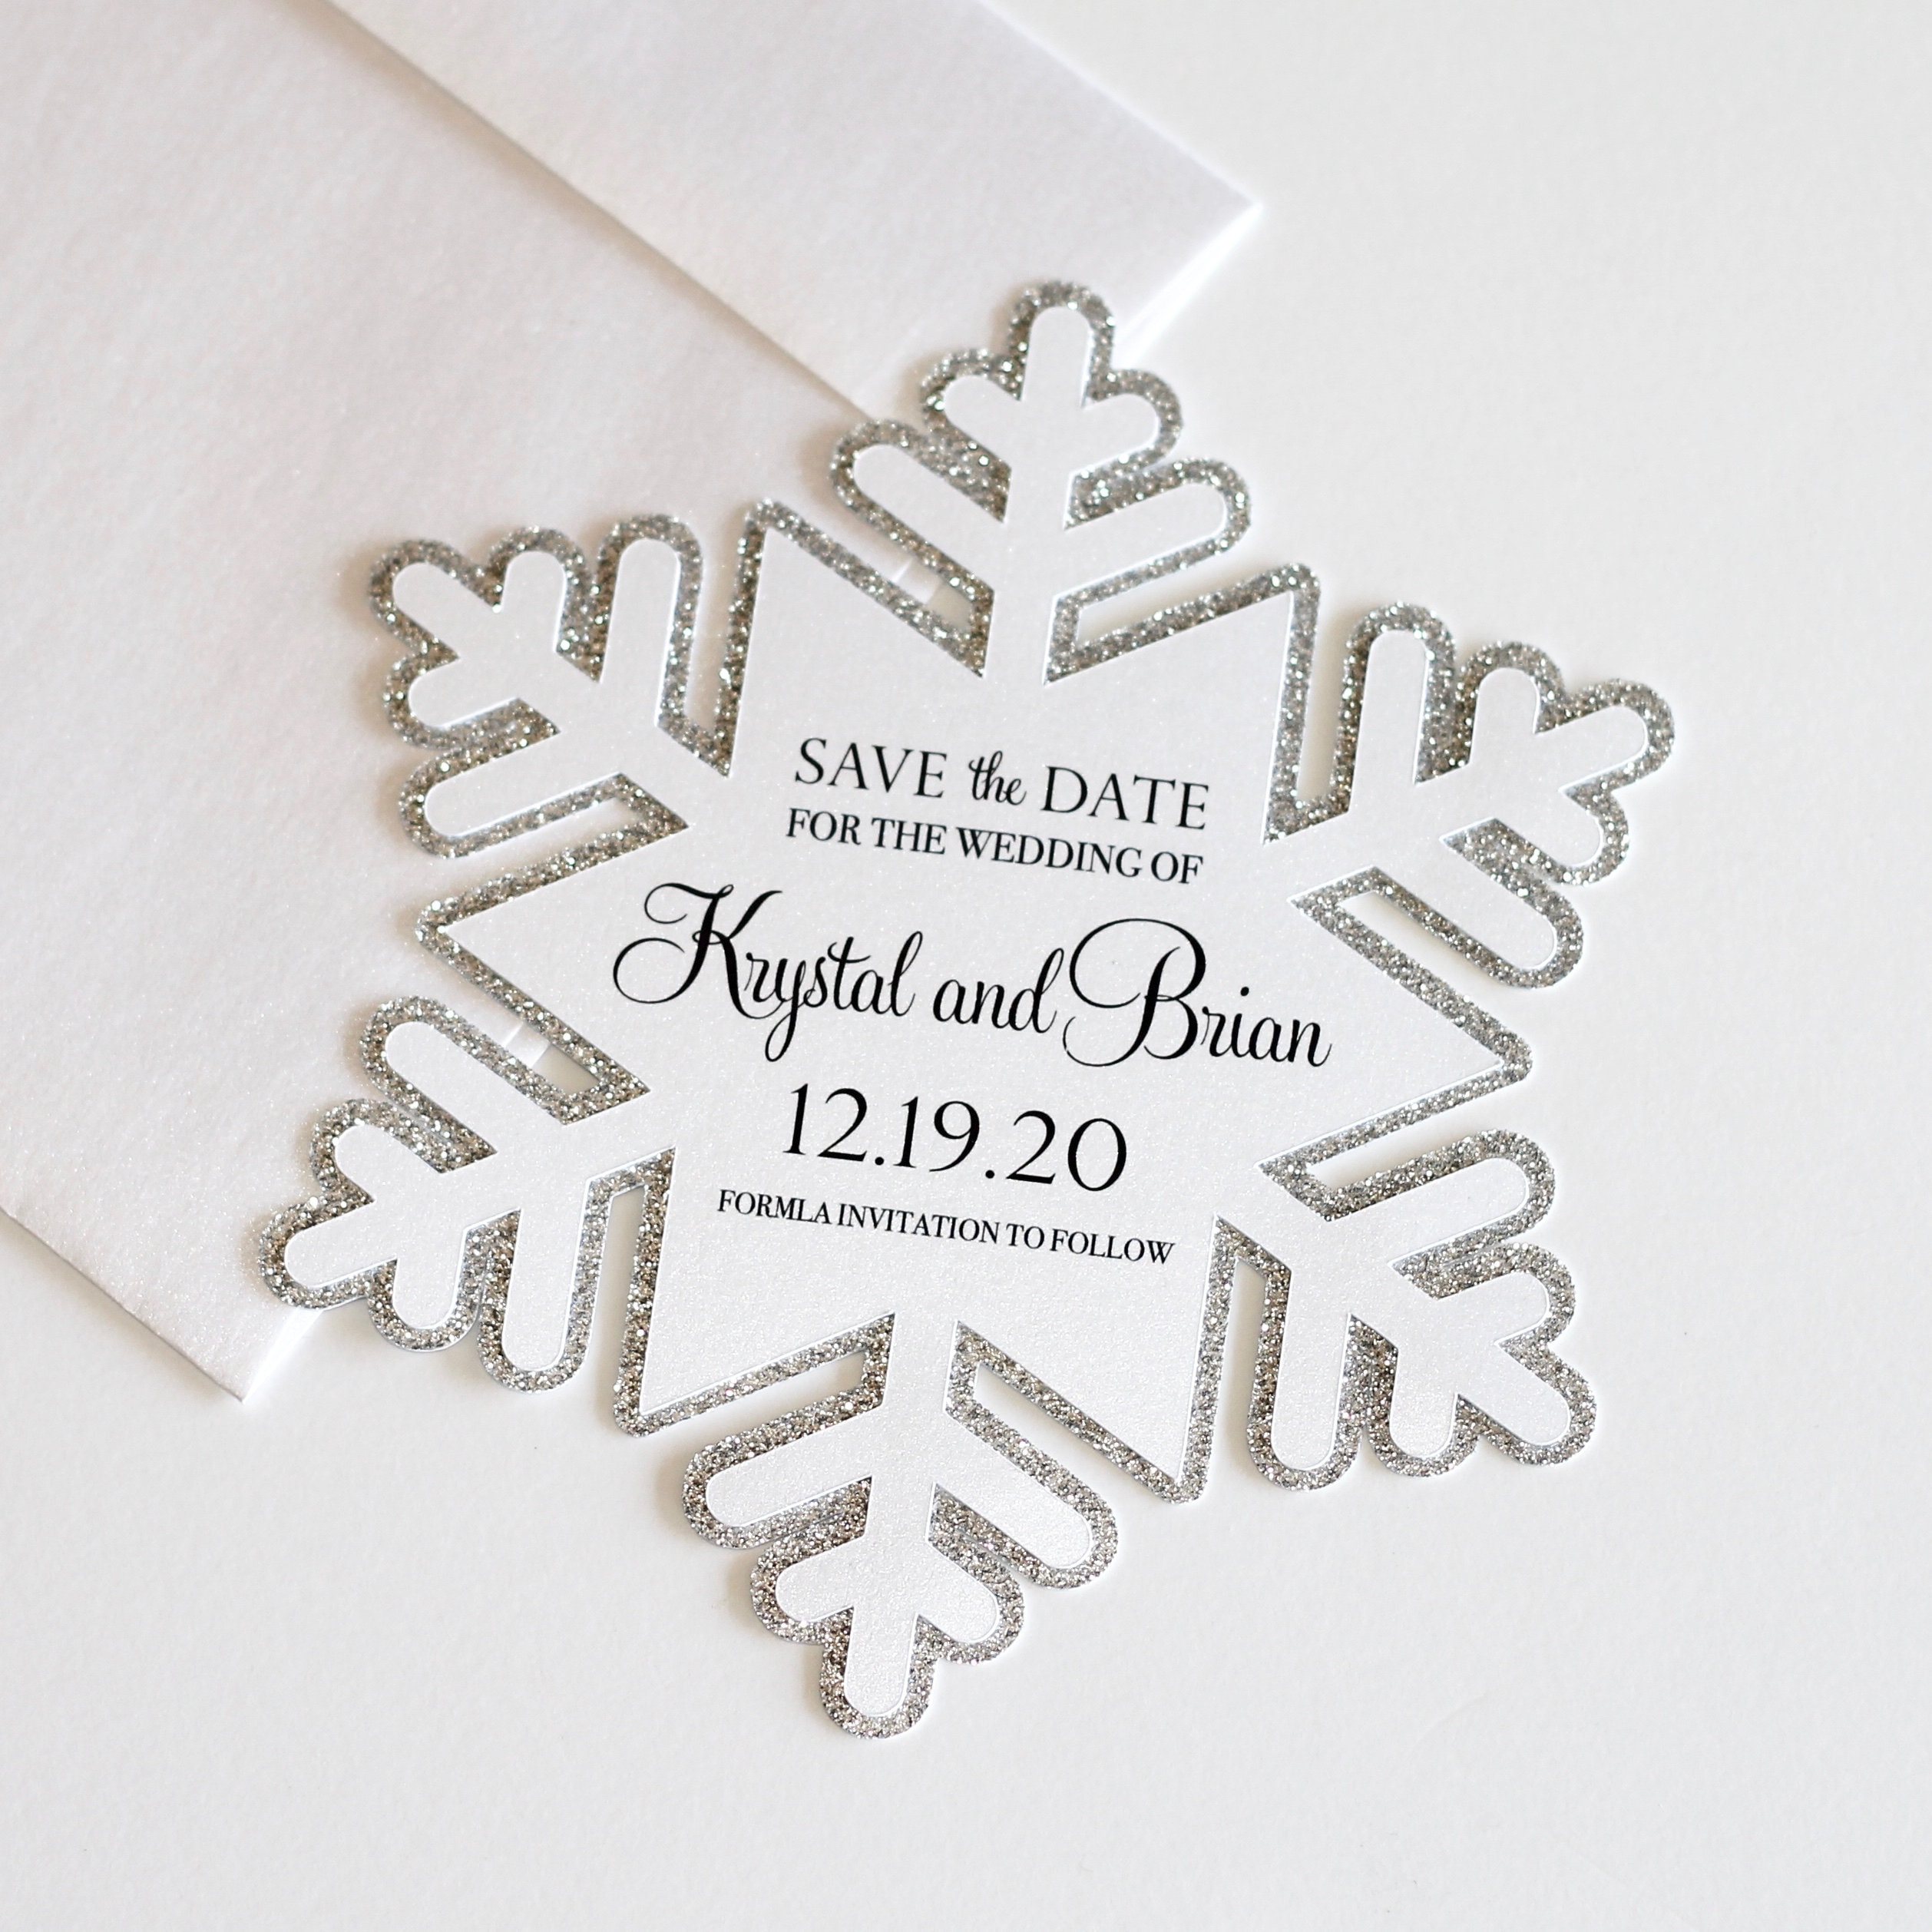 and Thank You Digital File Kit Printable lights magical winter ice glitter RSVP Save the Date Winter's Frost Themed Wedding Invitation